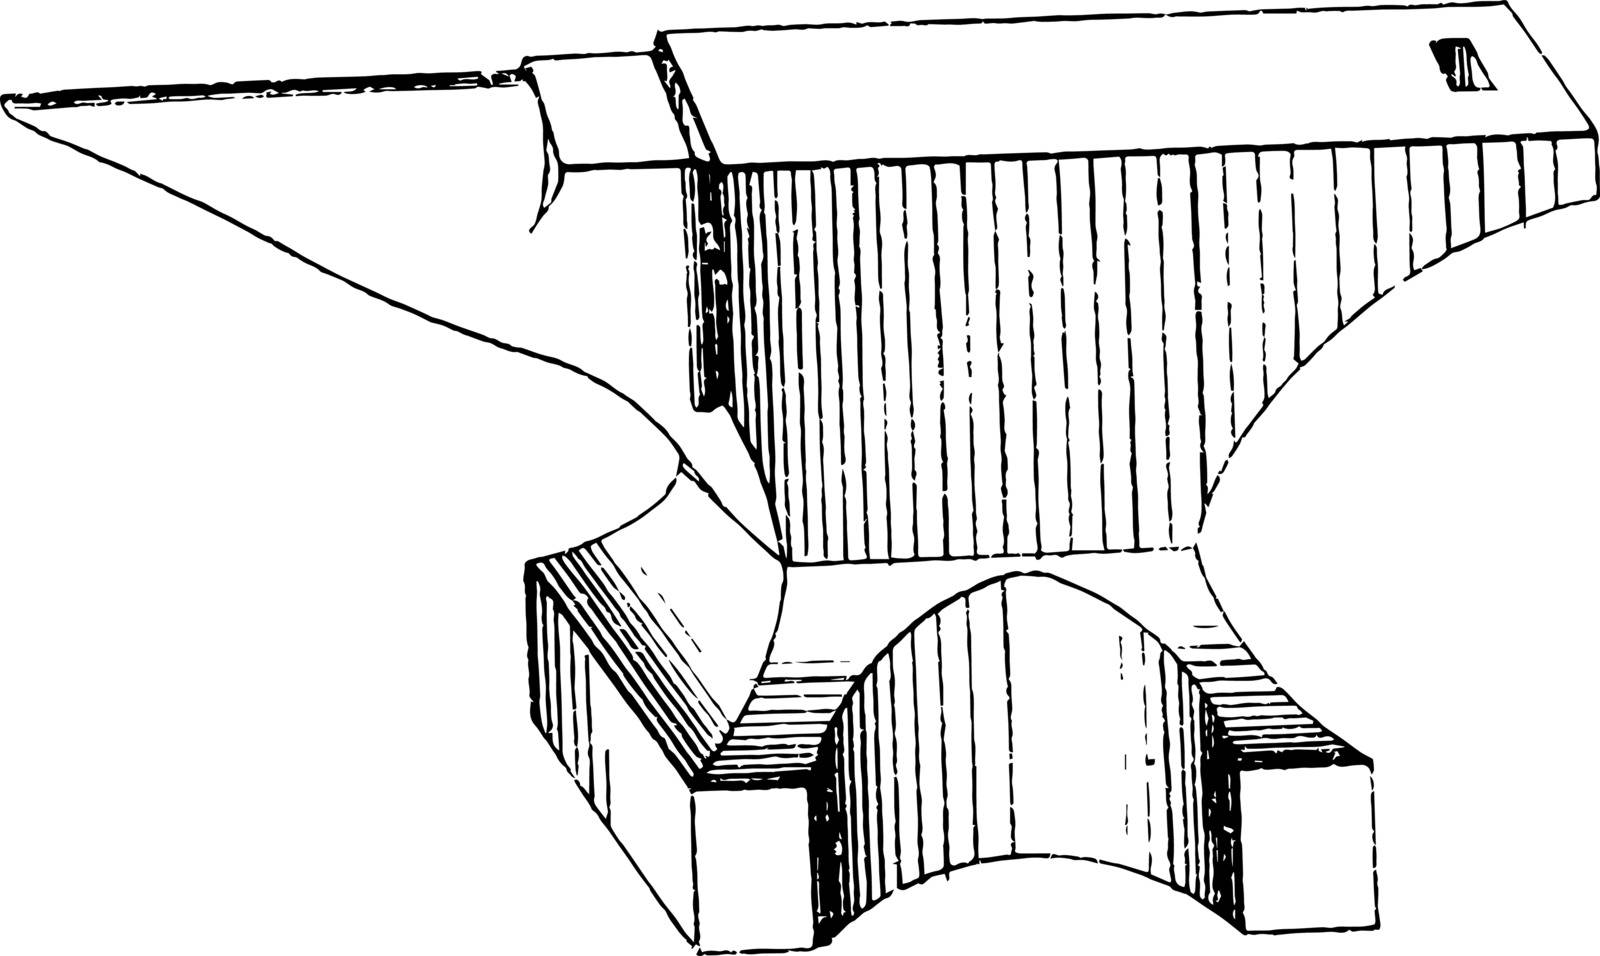 This illustration represents Anvil Tool which is a basic tool in the simplest terms it is a block with a hard surface vintage line drawing or engraving illustration.